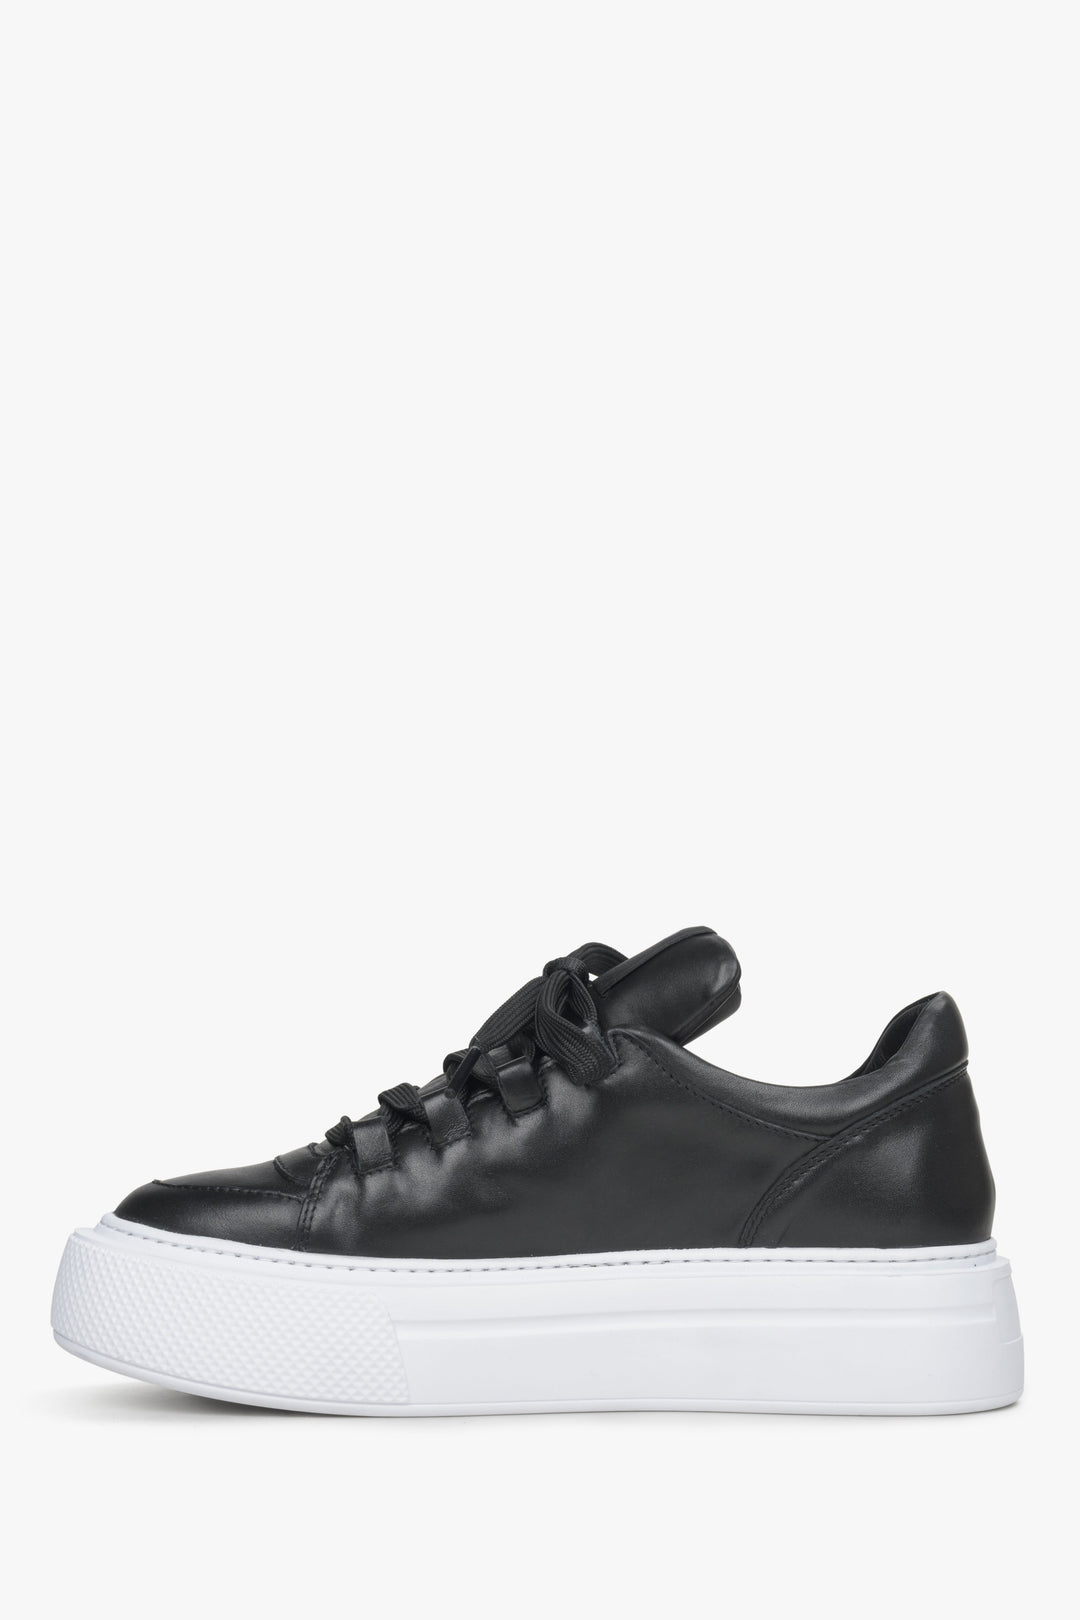 Women's black sneakers on a thick sole - shoe profile.